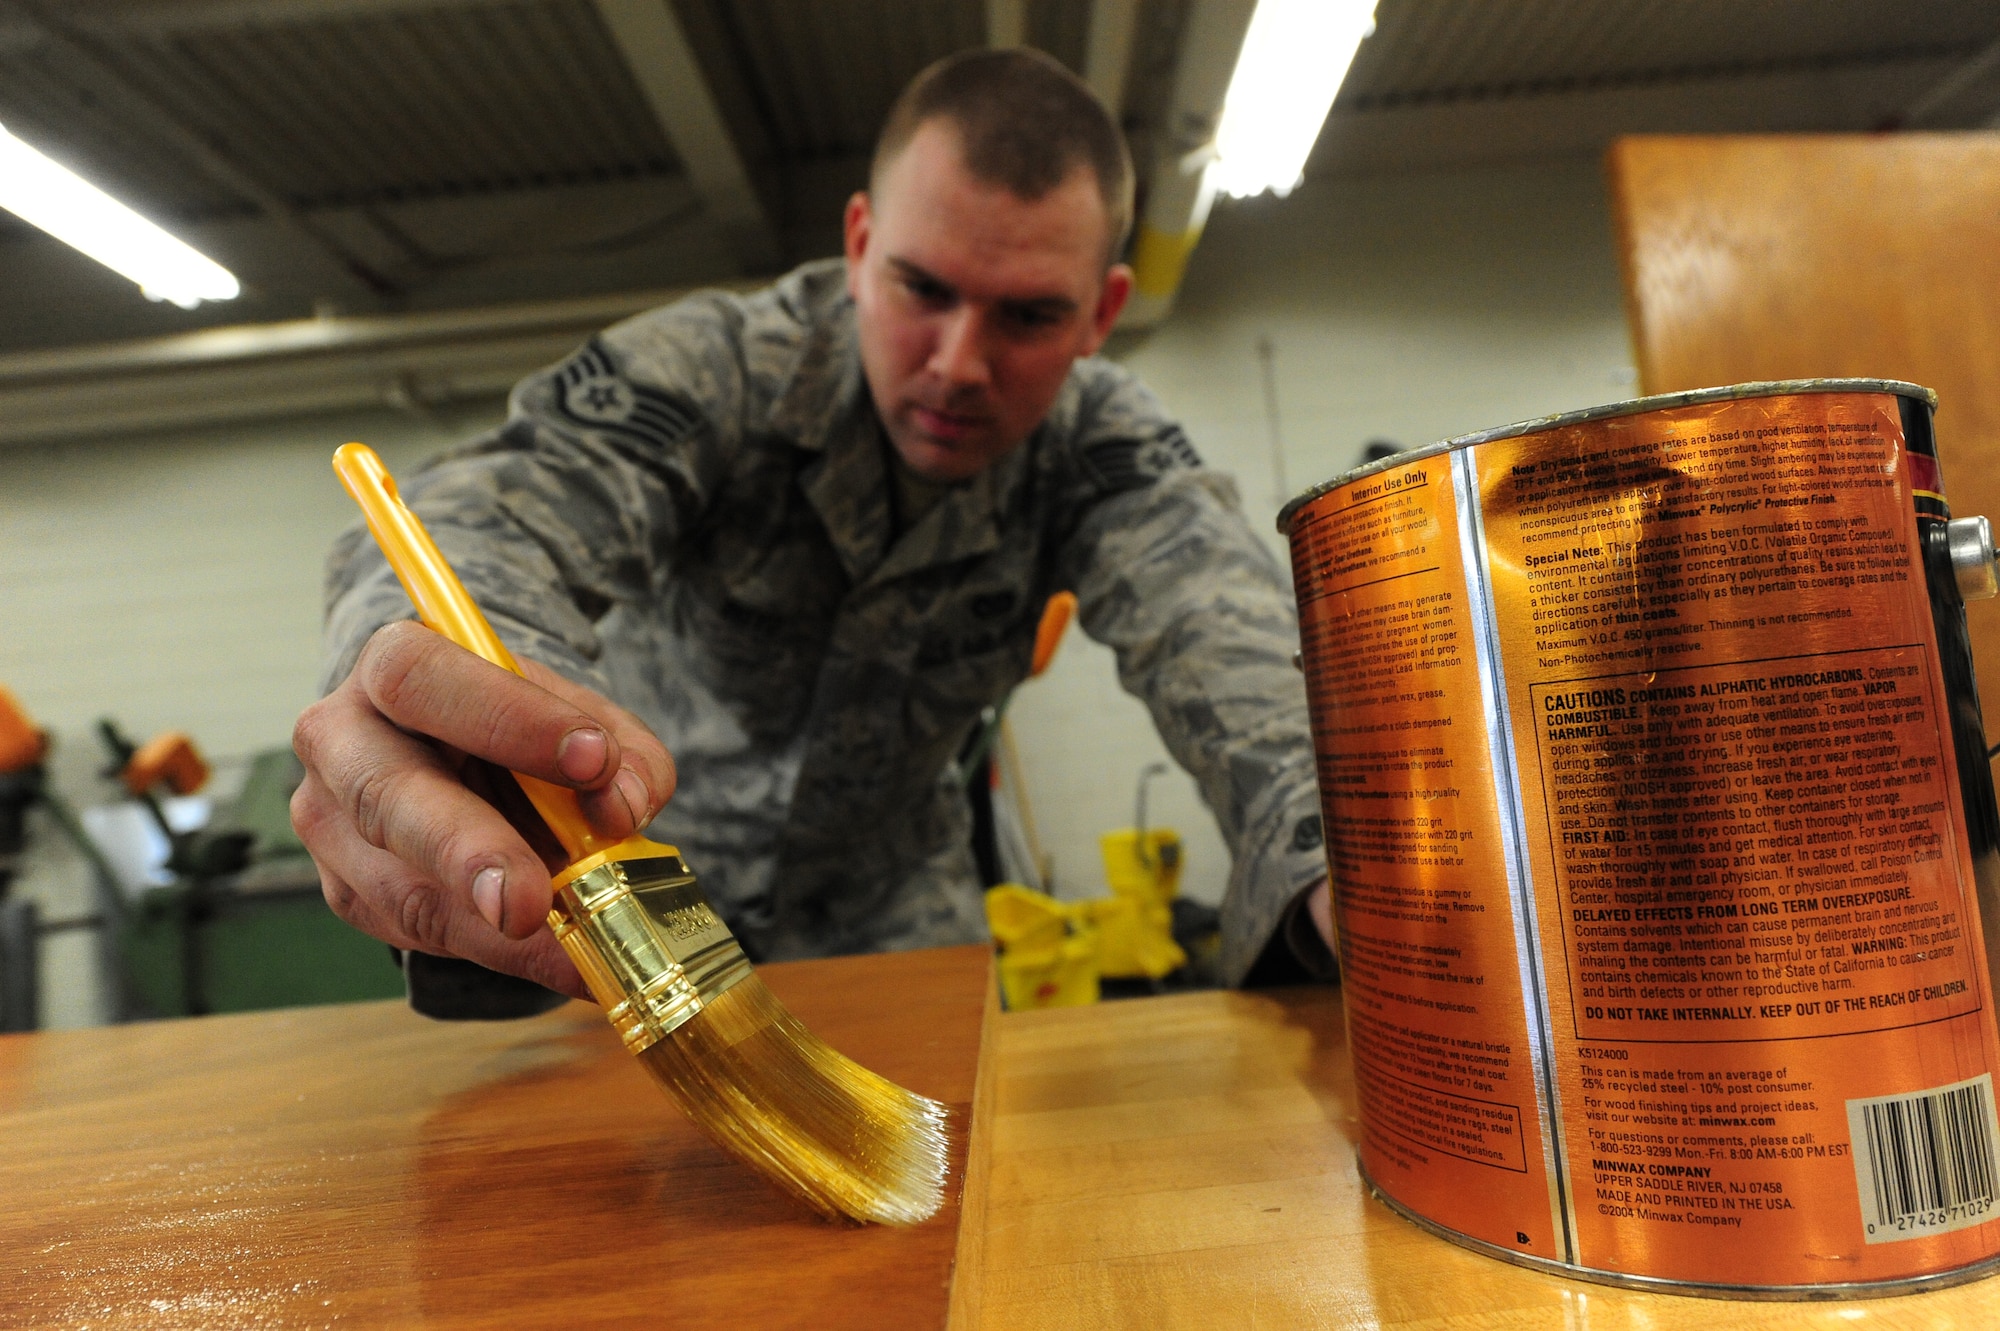 WHITEMAN AIR FORCE BASE, Mo. -- Staff Sgt. Adam Boyd, 509th Civil Engineer Squadron structural supervisor, polishes a wooden door with polyurethane, Feb. 27. The polish provides a durable protective finish that guards against the absorption of moisture. (U.S. Air Force photo/Staff Sgt. Nick Wilson) (Released)